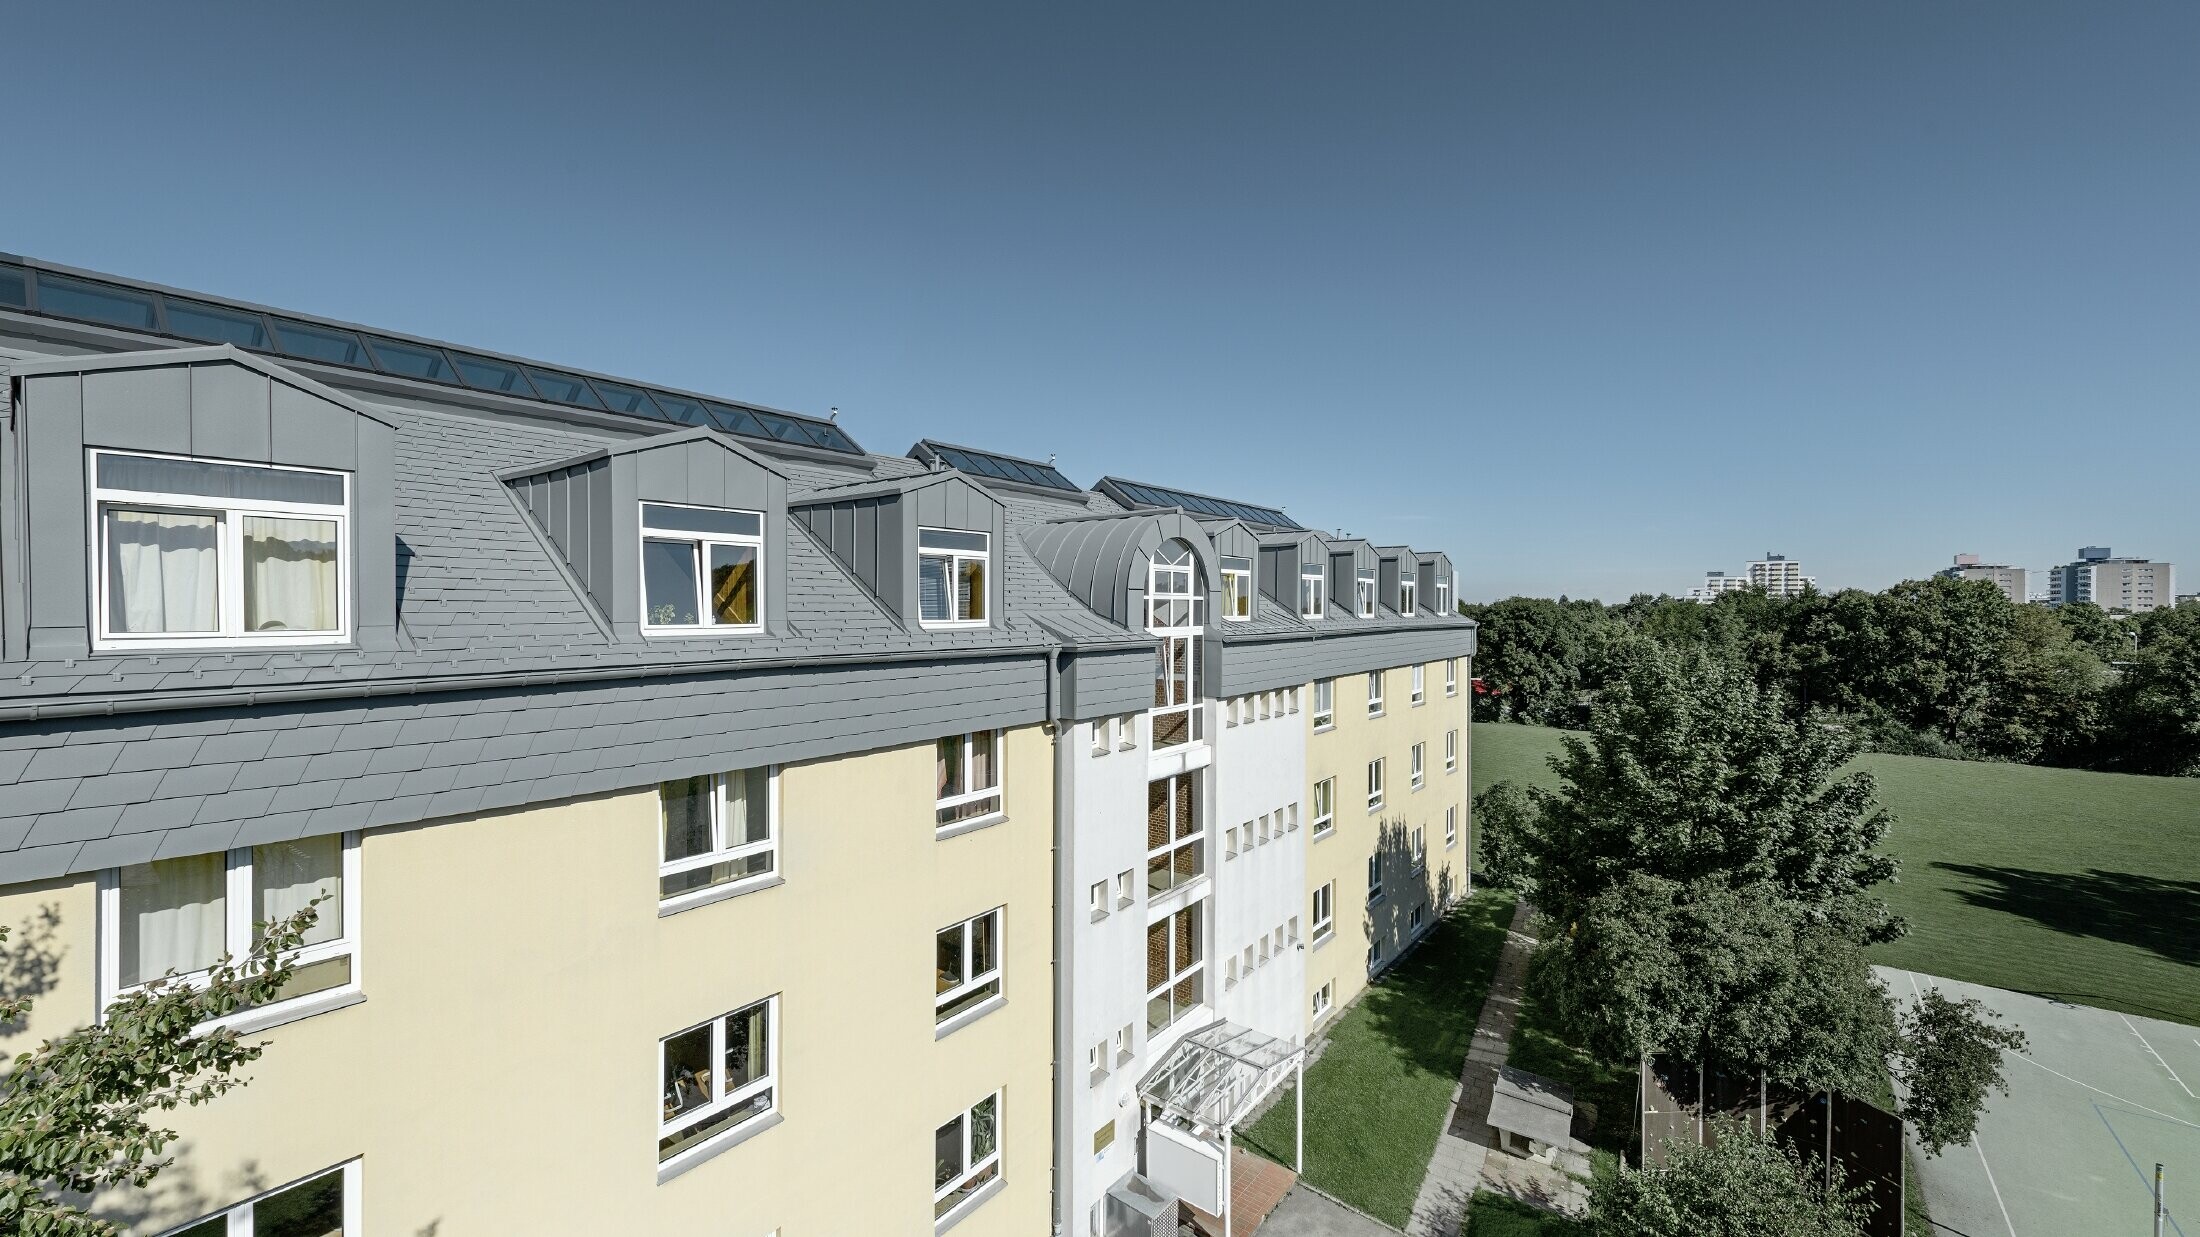 Top floor of the Albertinum building in Munich (Germany) with PREFA shingle and standing seam in light grey